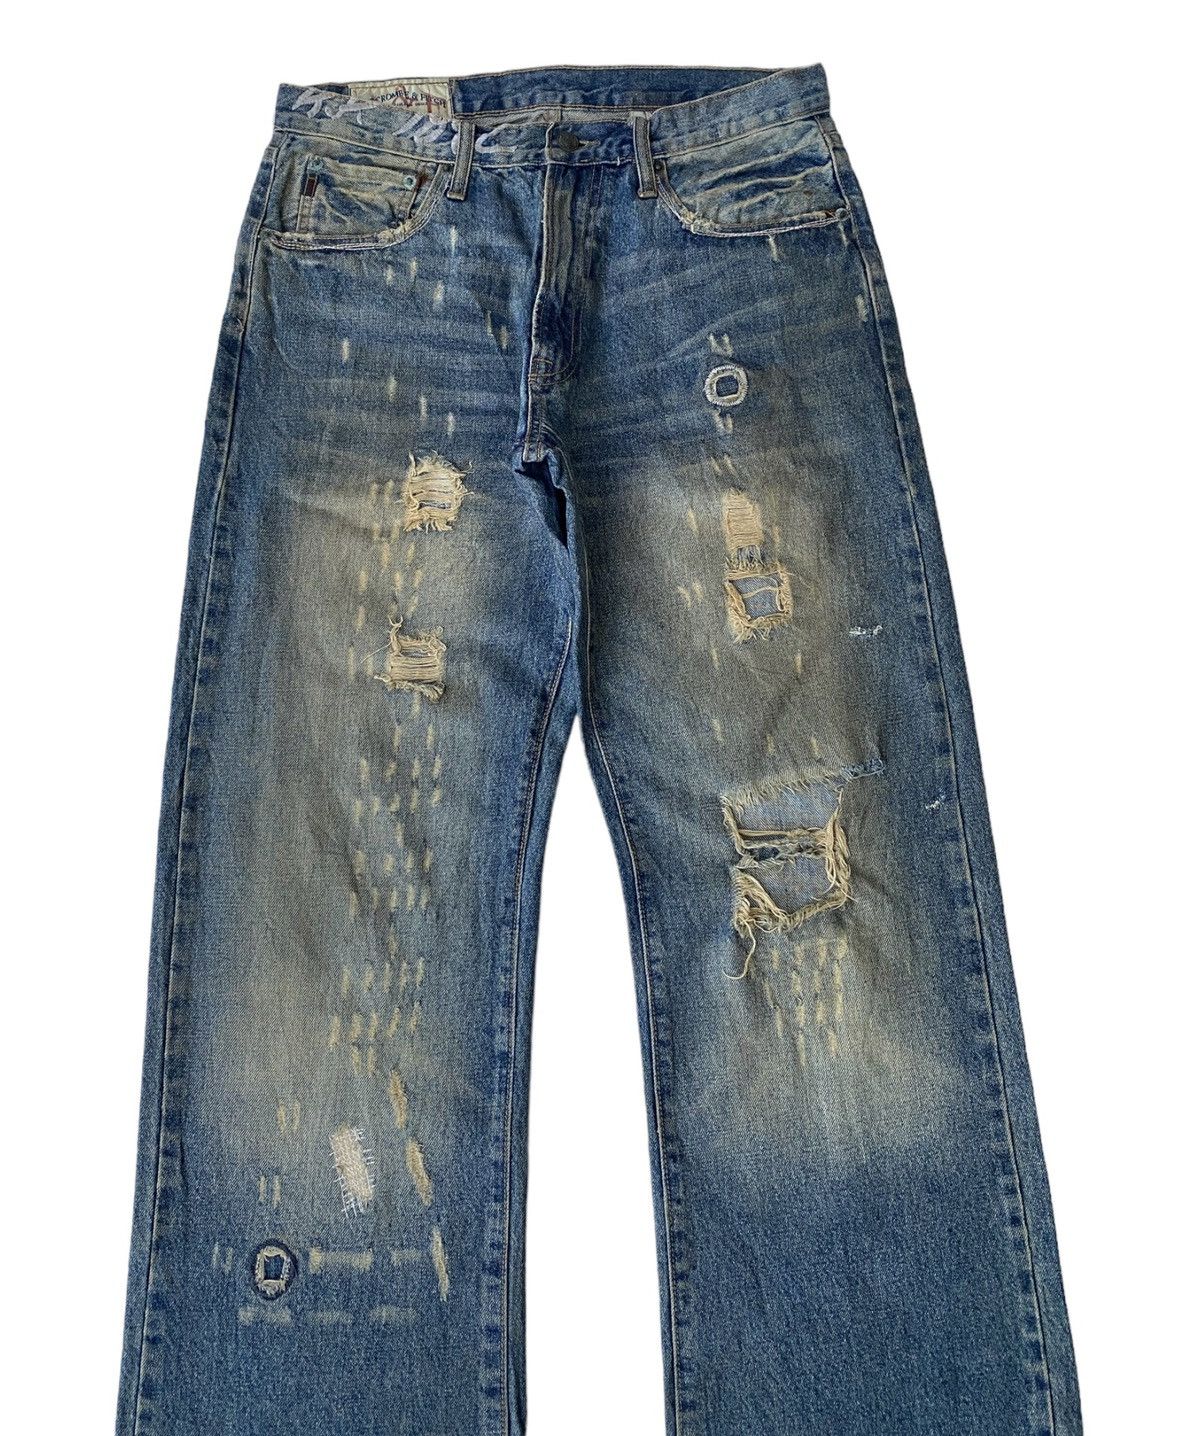 🔥FLARE JEANS RUSTY BAGGY ABERCROMBIE & FITCH DISTRESS DENIM - 5